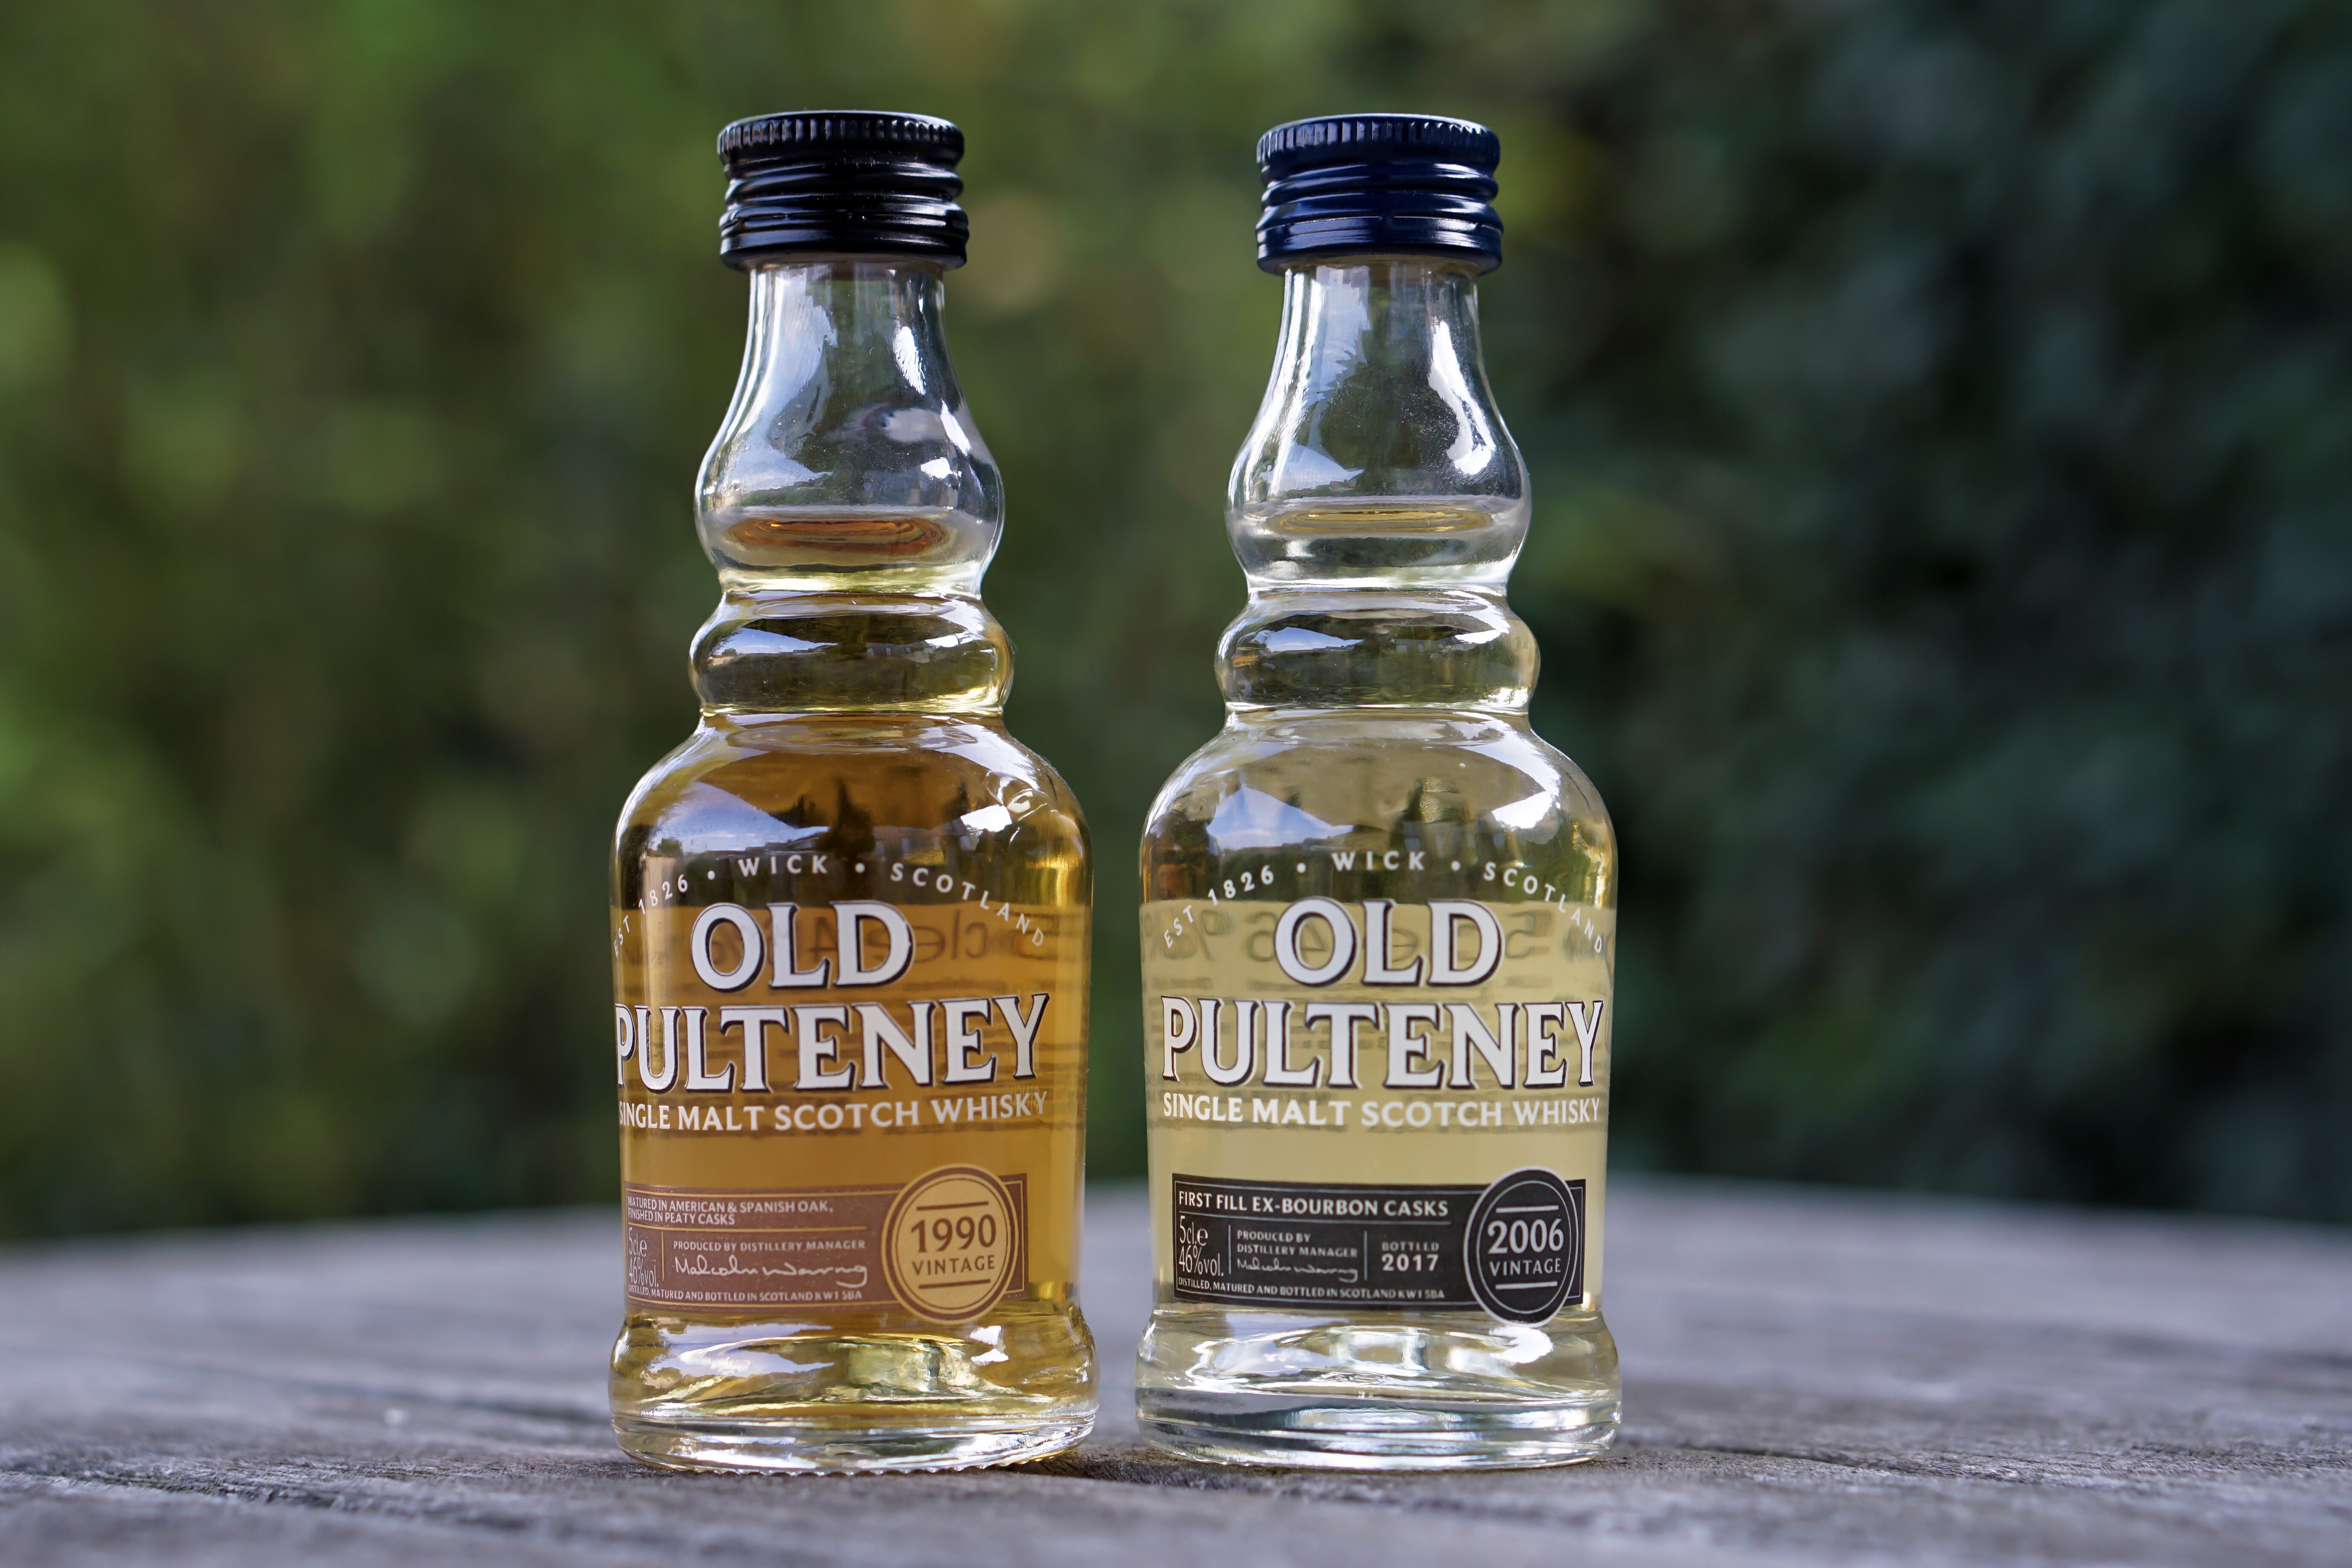 Old Pulteney 2006 & 1990